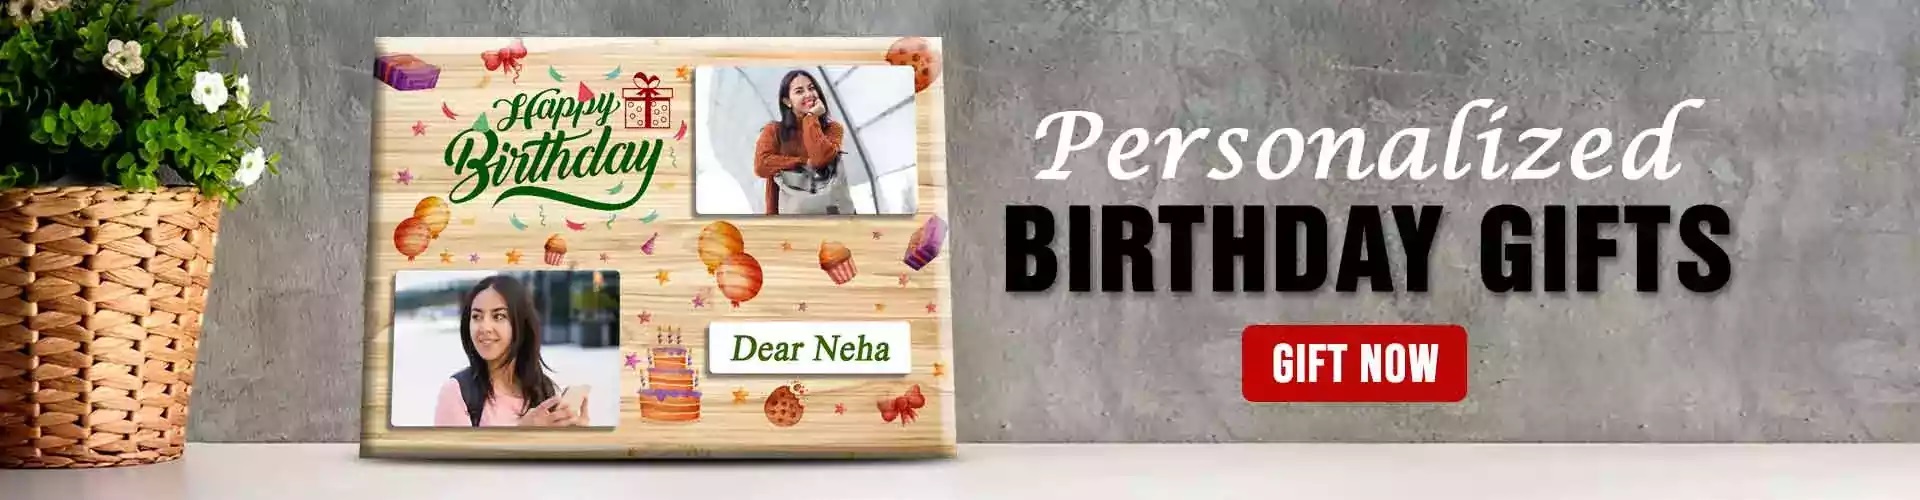 personalised birthday gifts